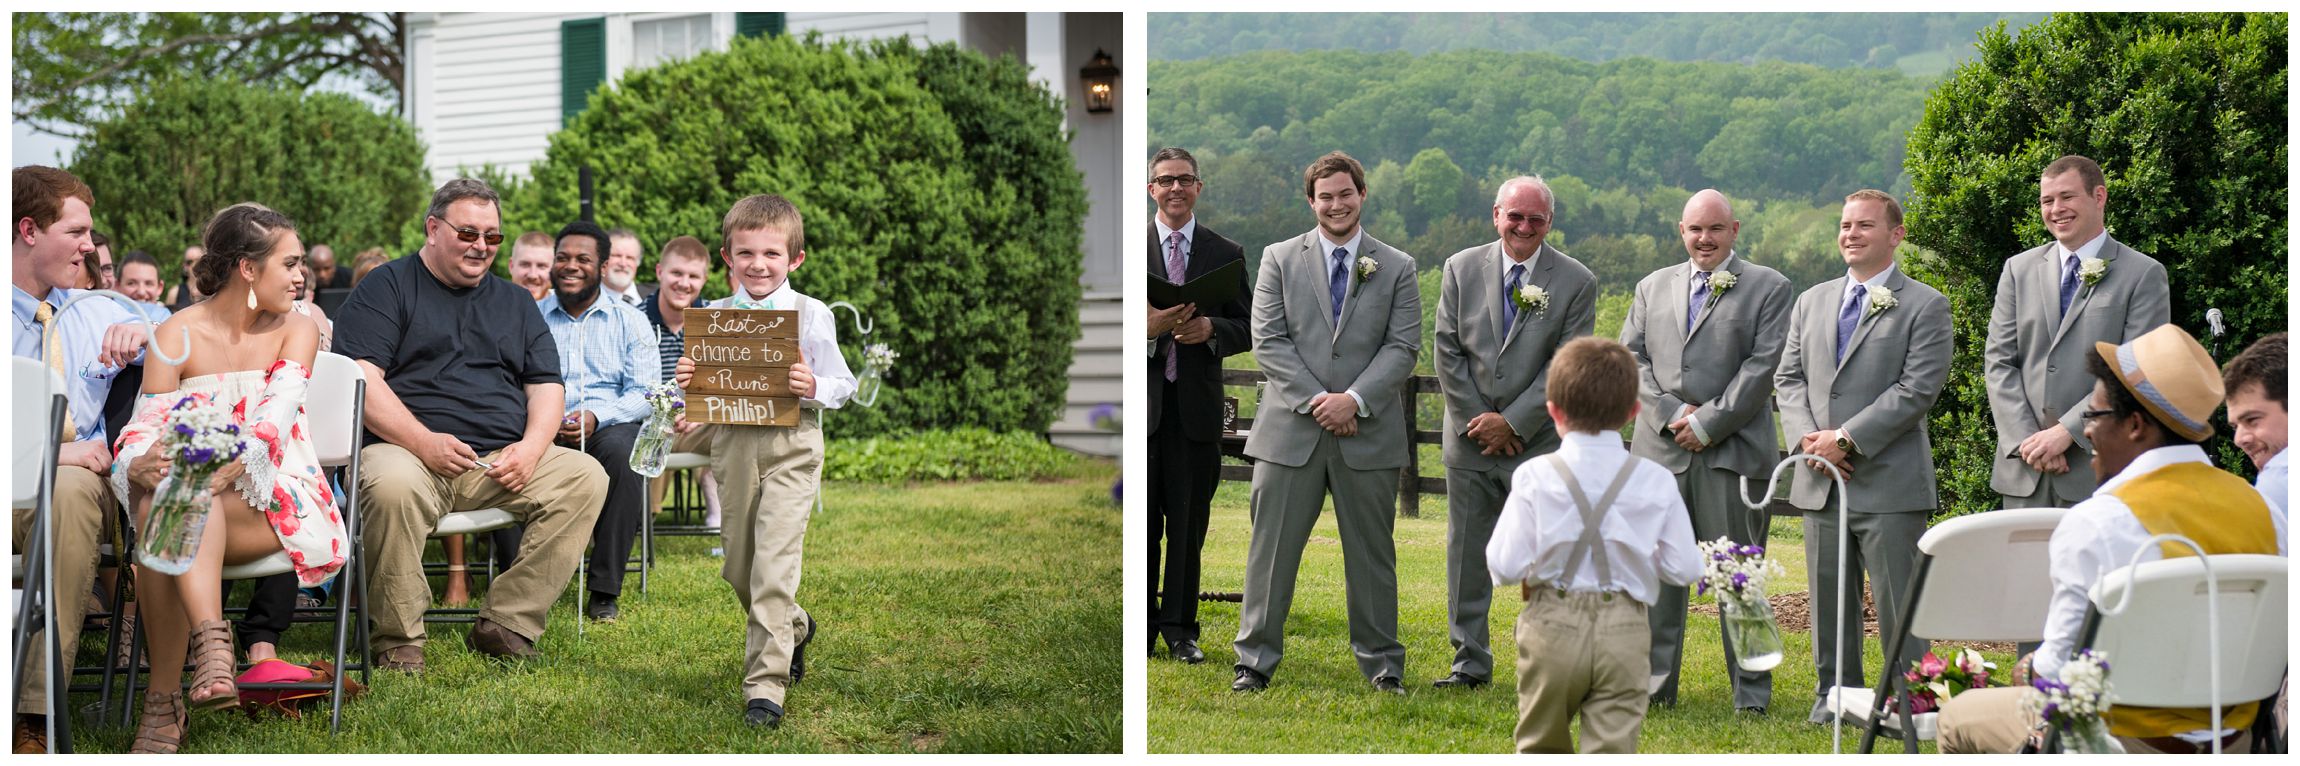 ring bearer carries sign saying "Last chance to run" during wedding ceremony at Wolftrap Farm